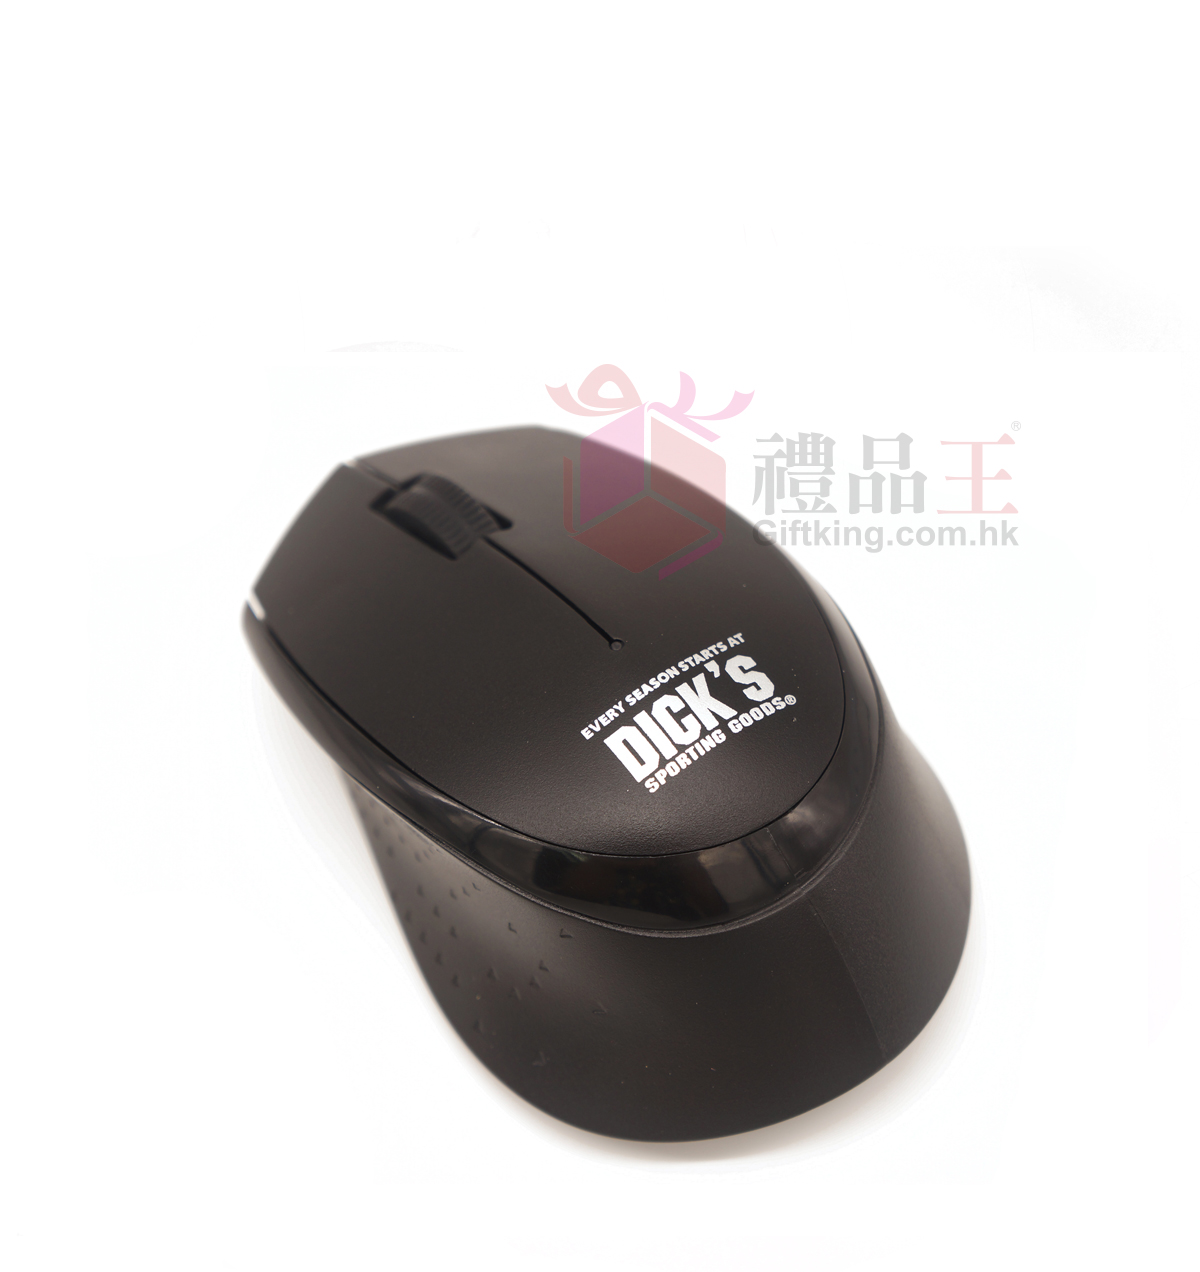 Dick's sporting goods Wireless Mouse (Stationery Gift)